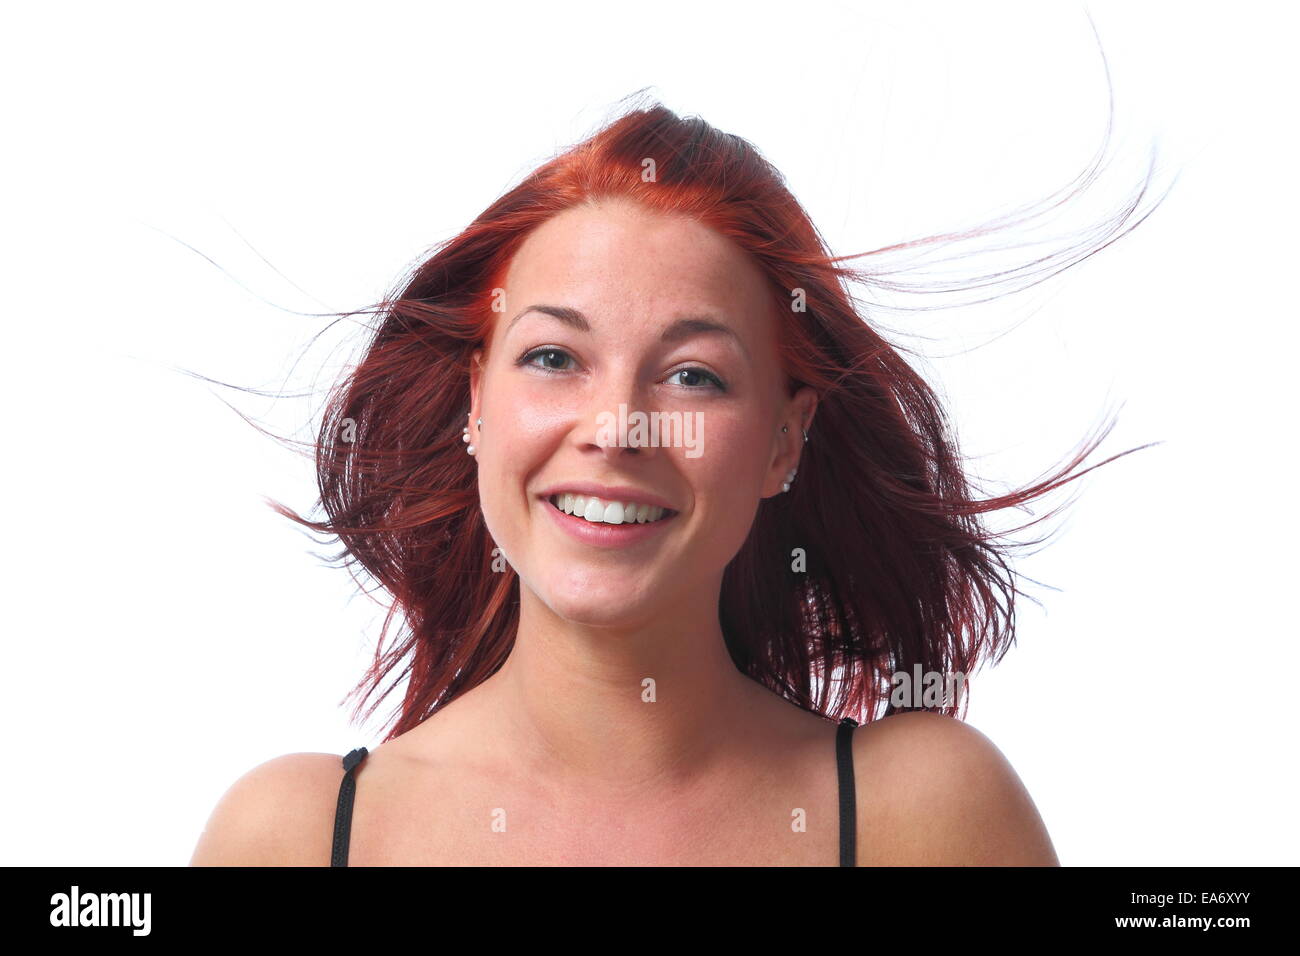 A Young dynamik redhaired woman Stock Photo